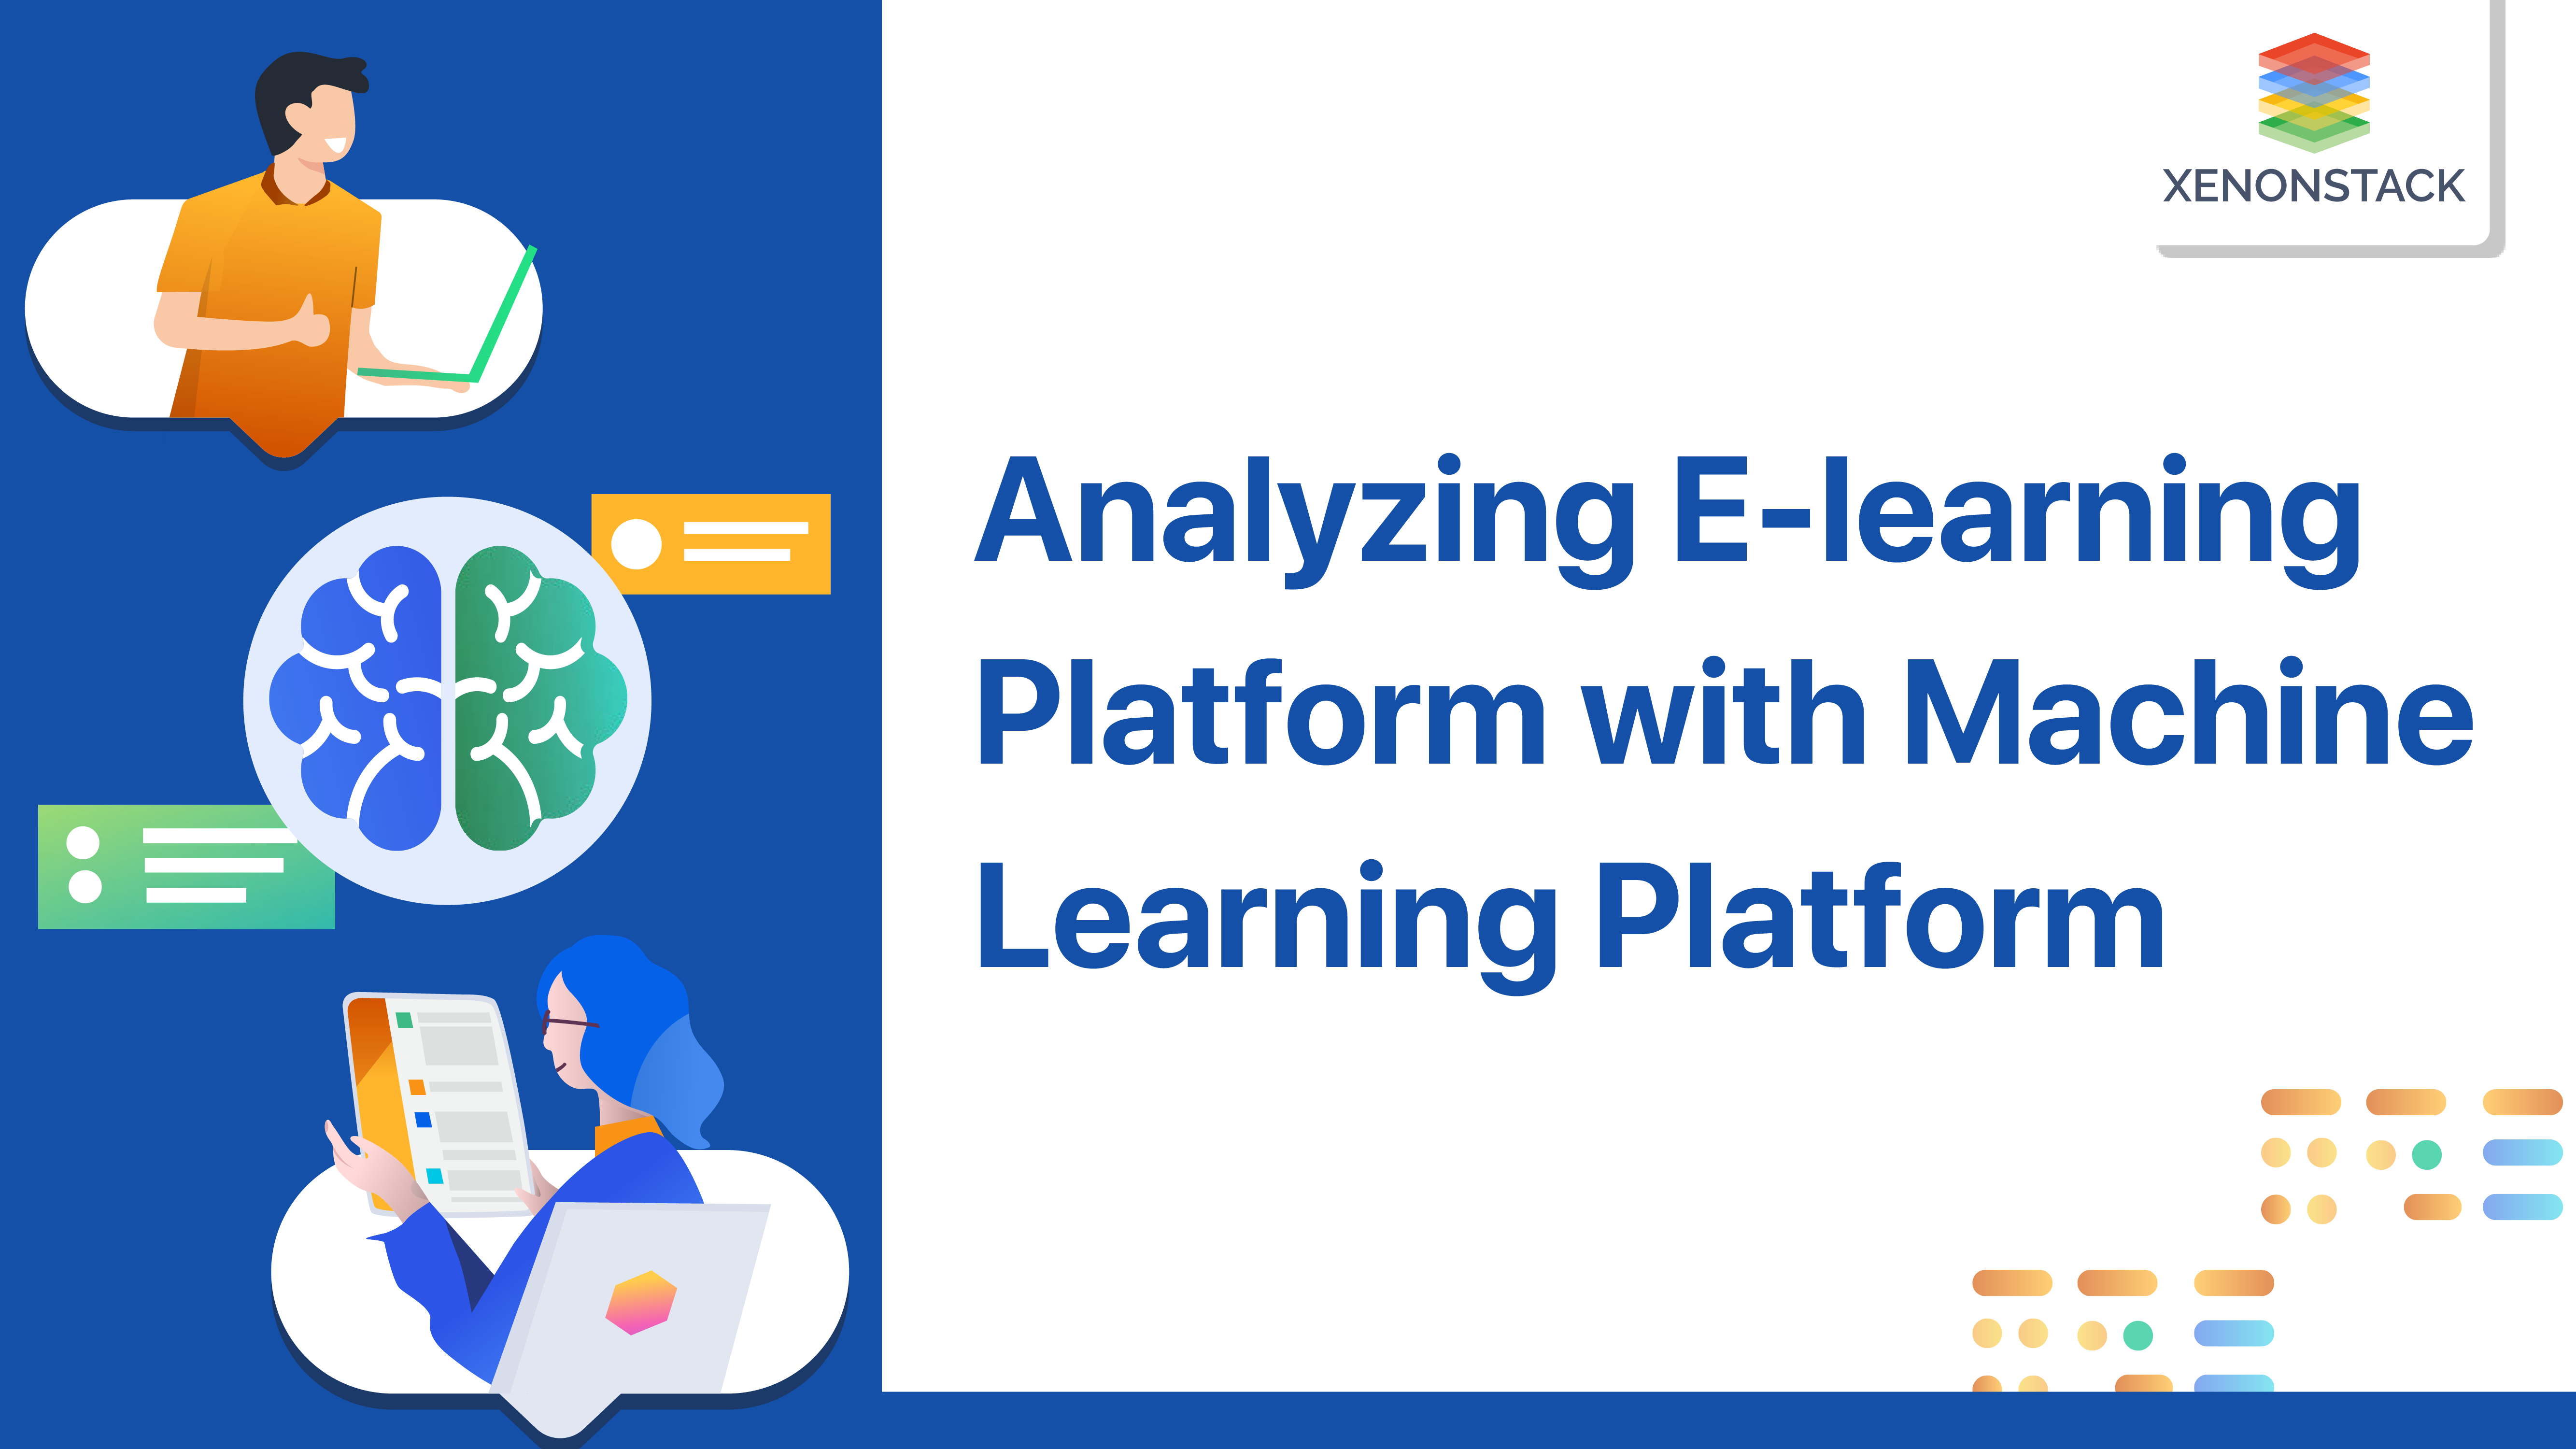 Analysis of E-learning Platform with AI and ML Model